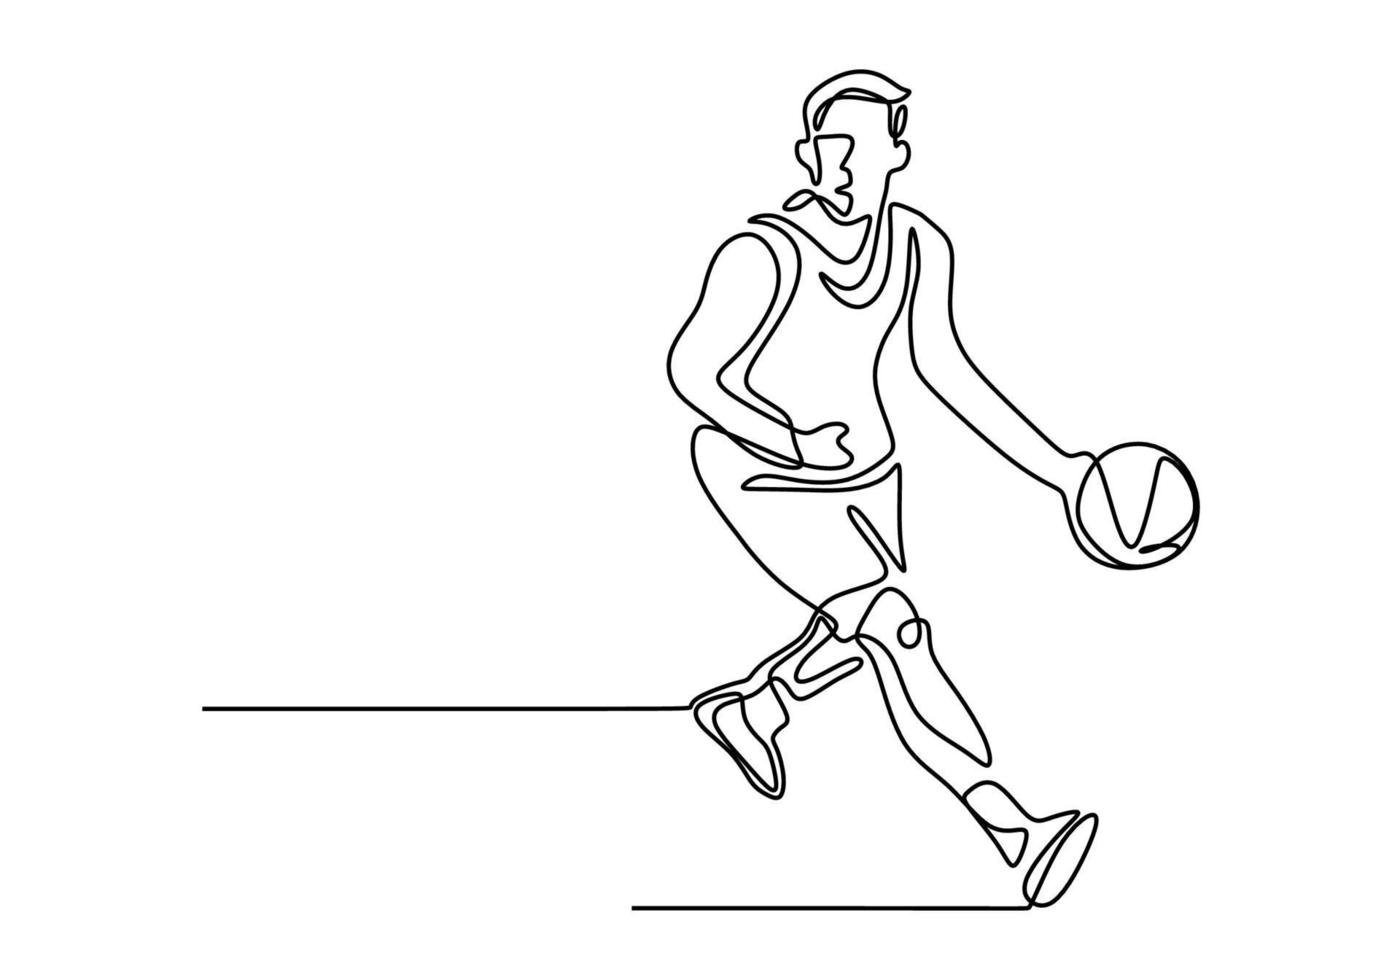 Basketball continuous one line drawing vector illustration.